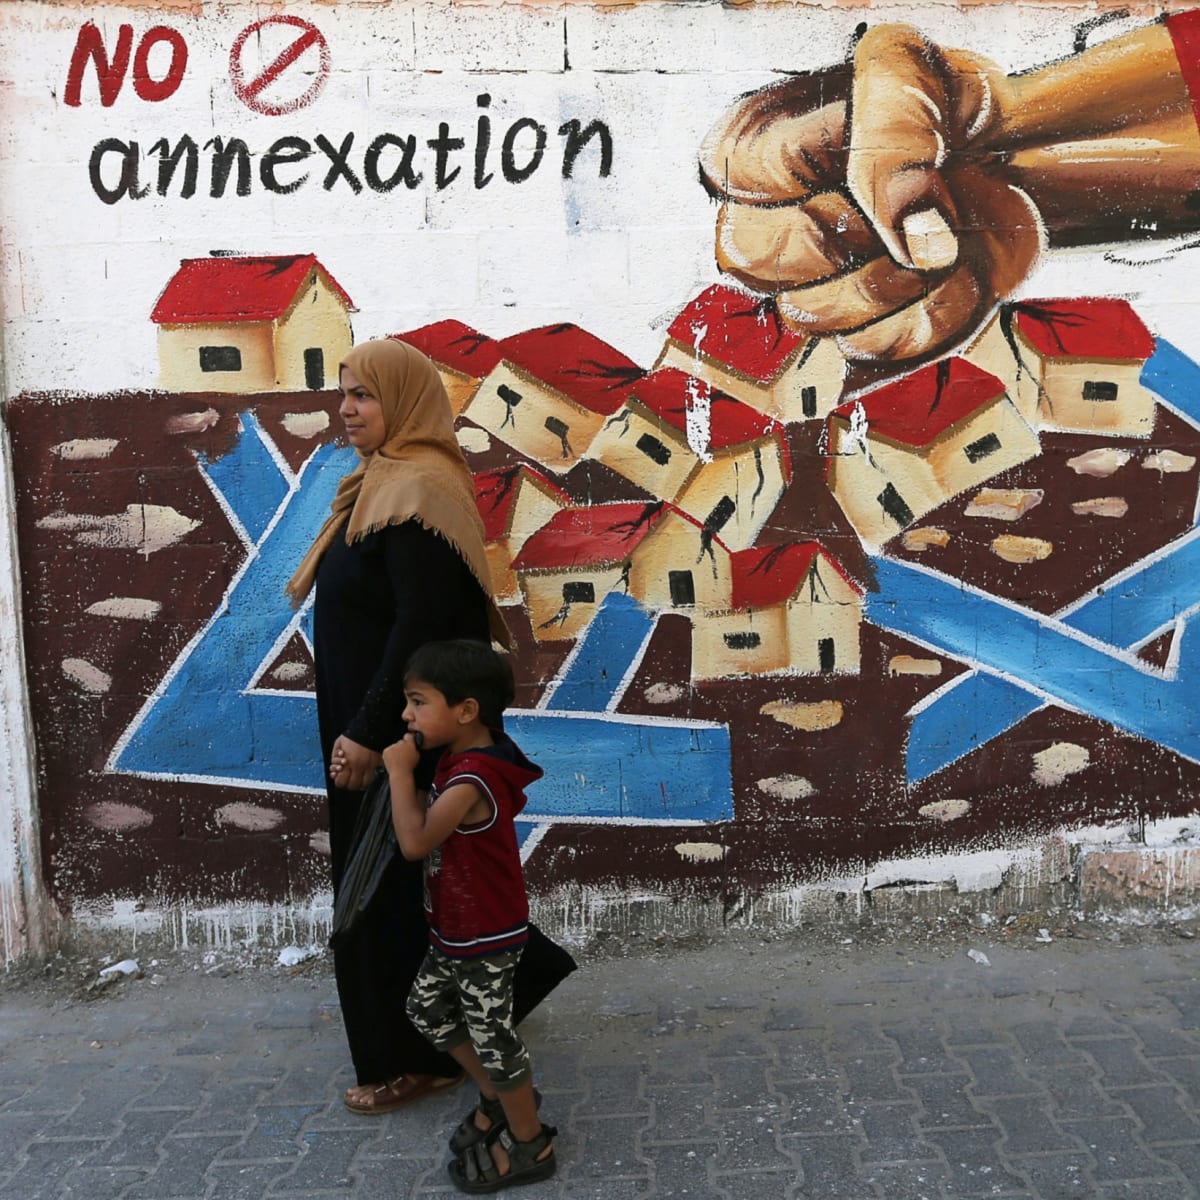 Haaretz:  What the Israeli Public Really Thinks About Annexation, From 1967 to Today